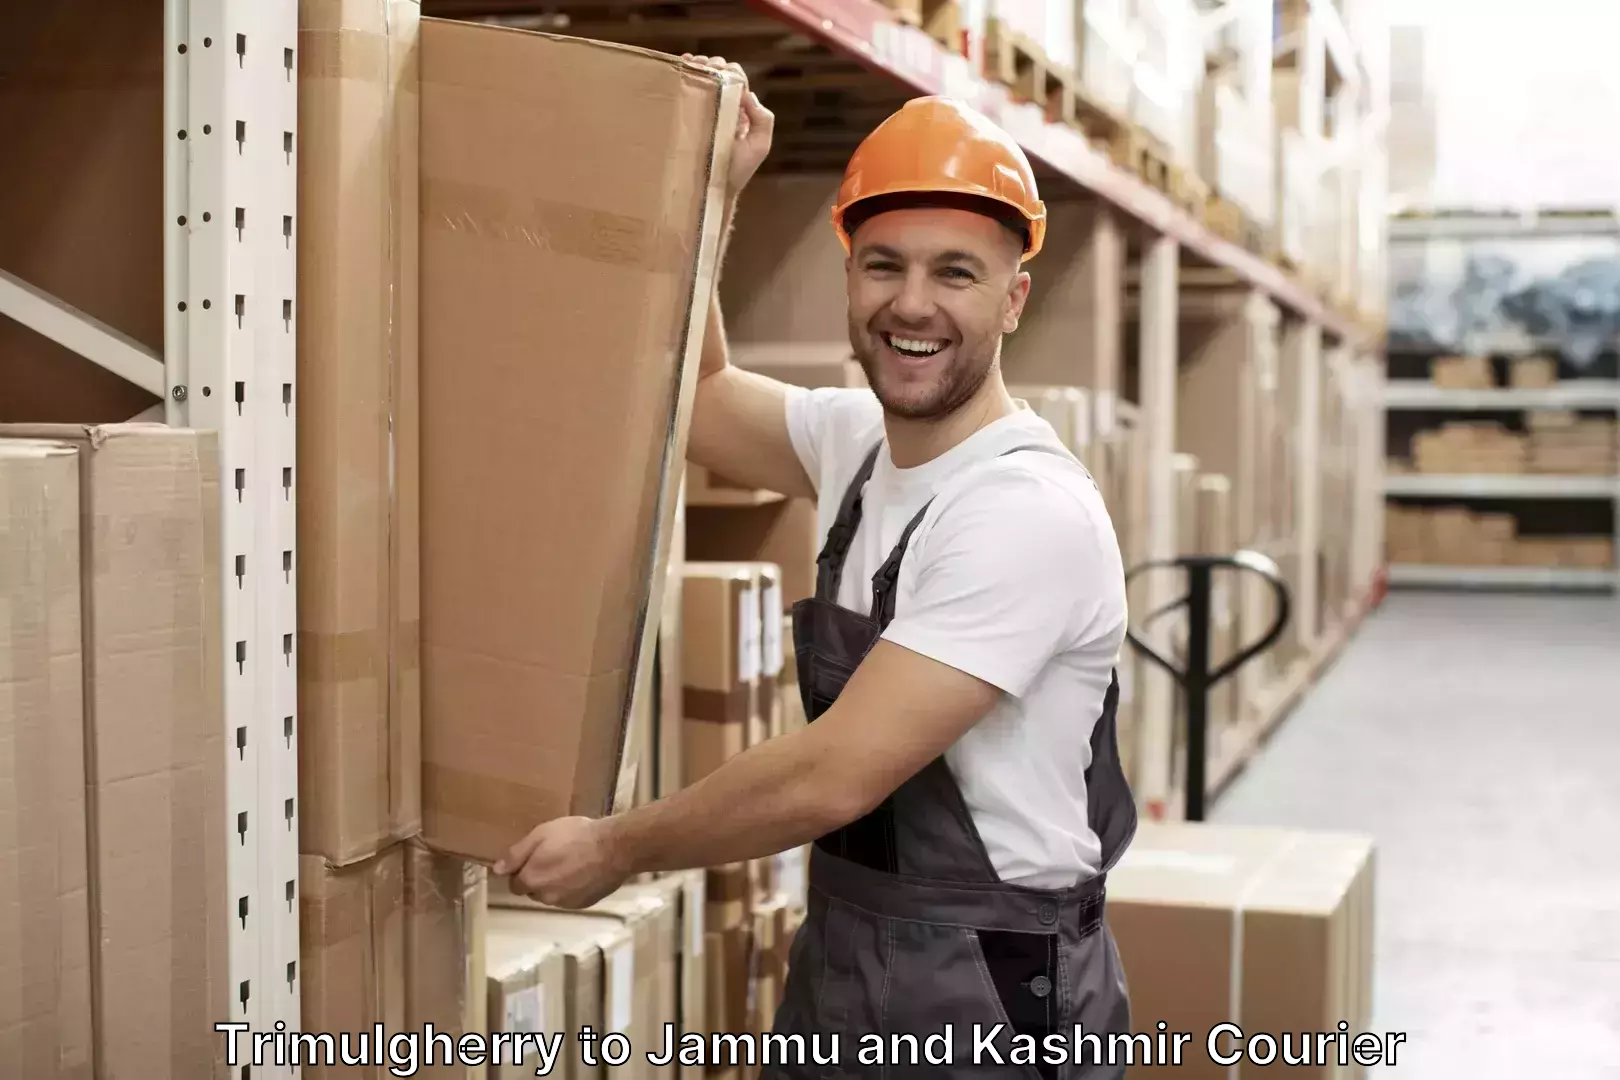 Personal effects shipping Trimulgherry to University of Kashmir Srinagar